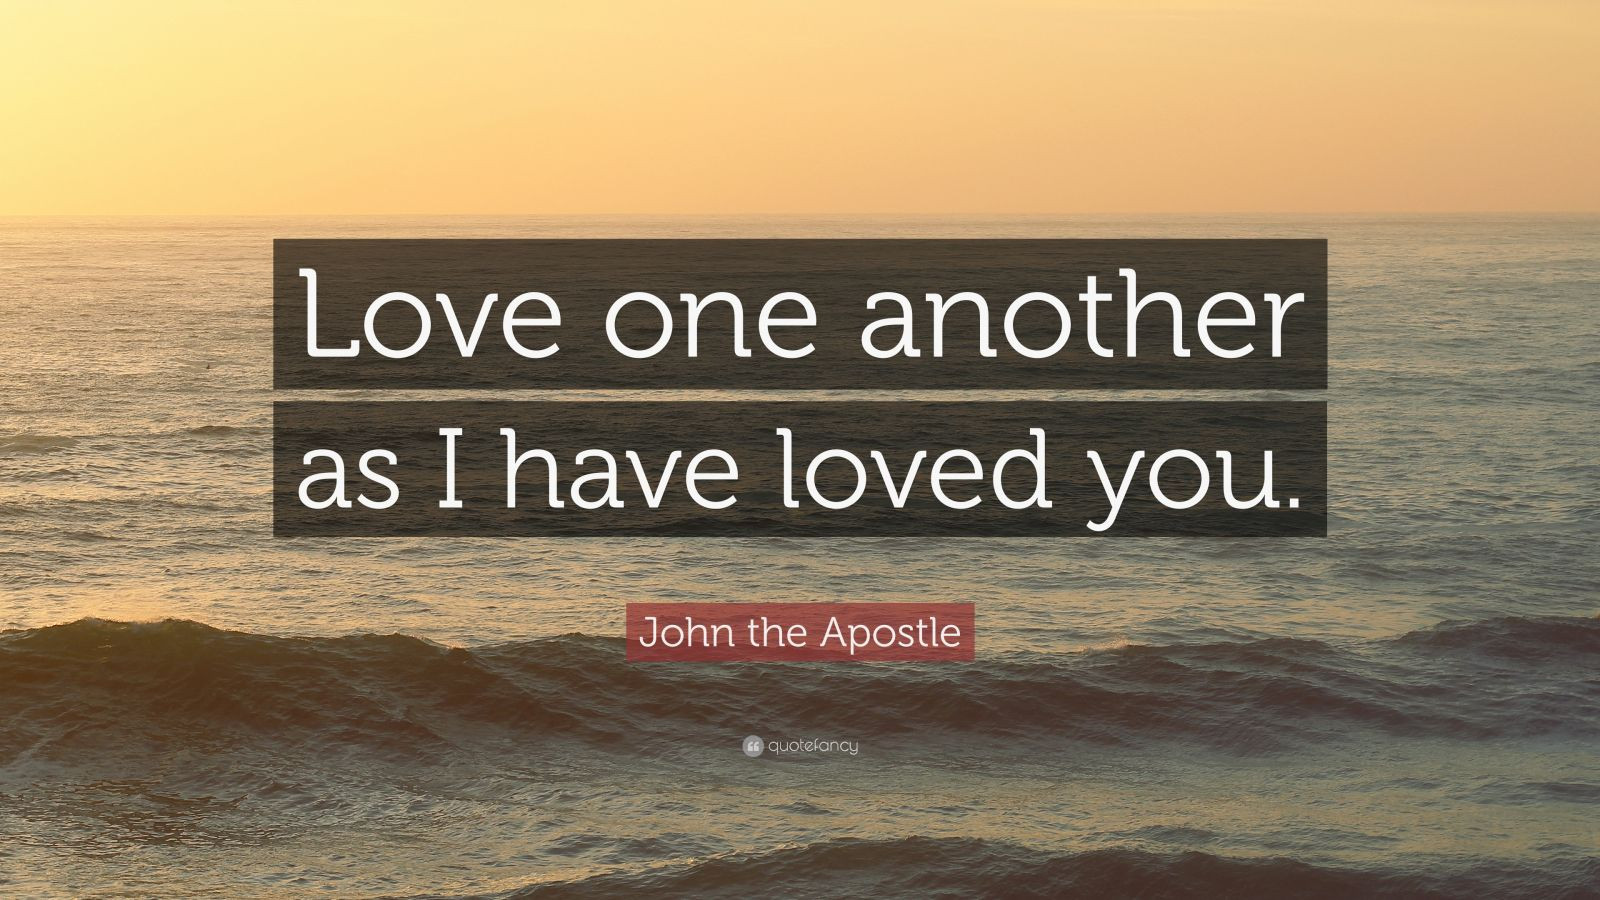 Quotes For The One You Love
 John the Apostle Quote “Love one another as I have loved